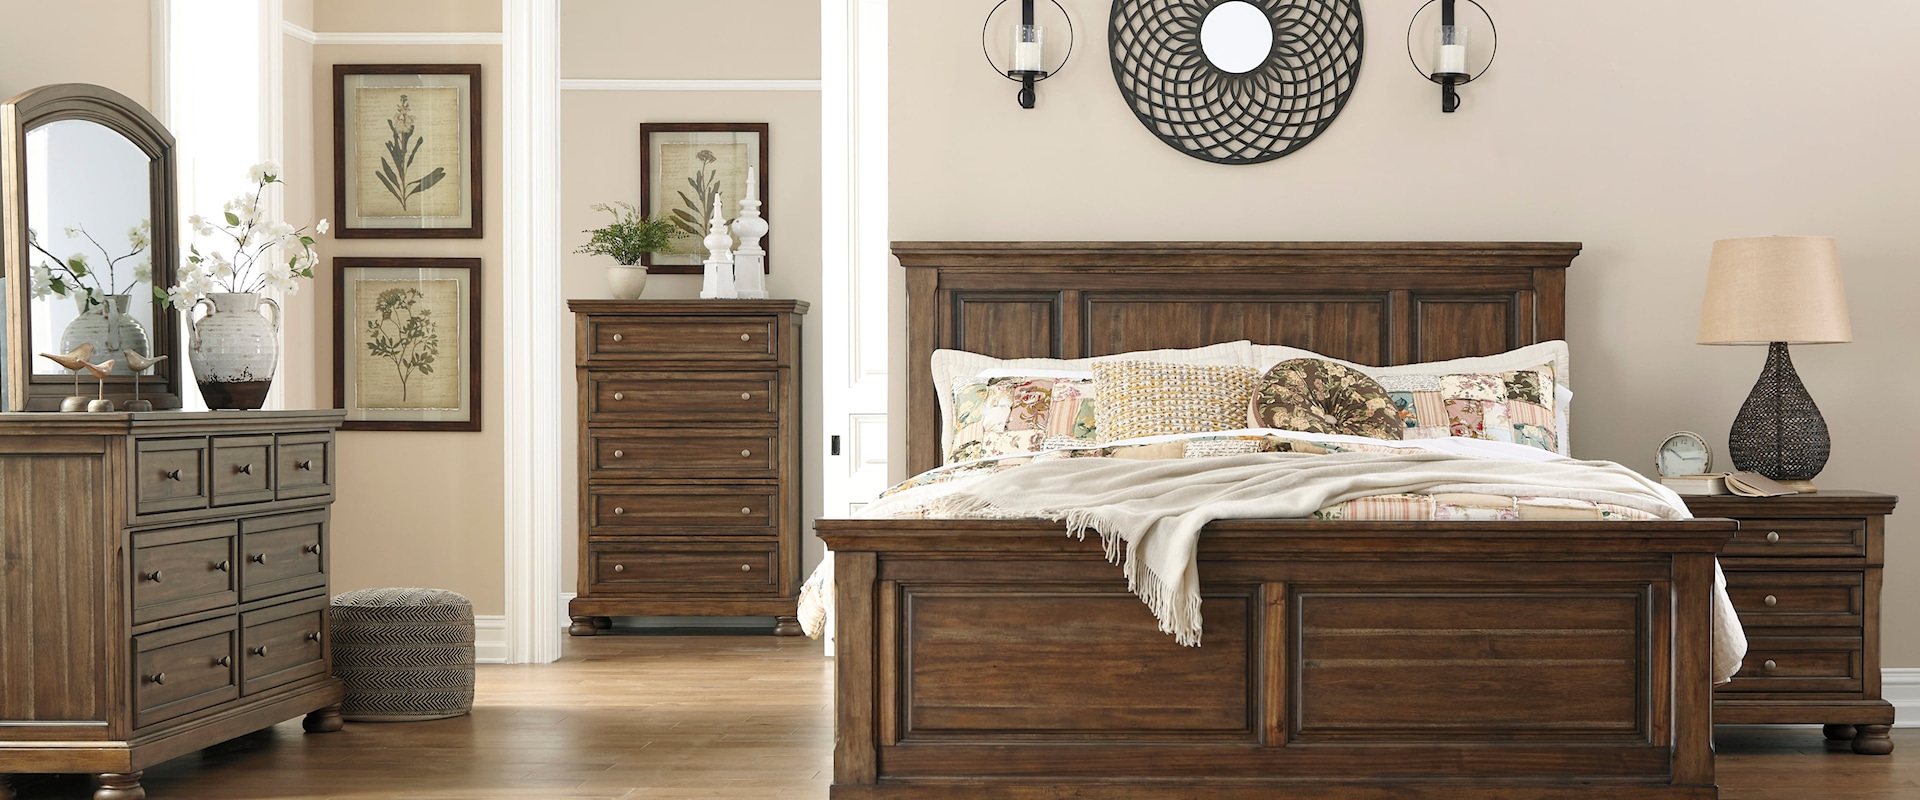 3 Piece Queen Panel Bed, 7 Drawer Dresser and 2 Drawer Nightstand Set